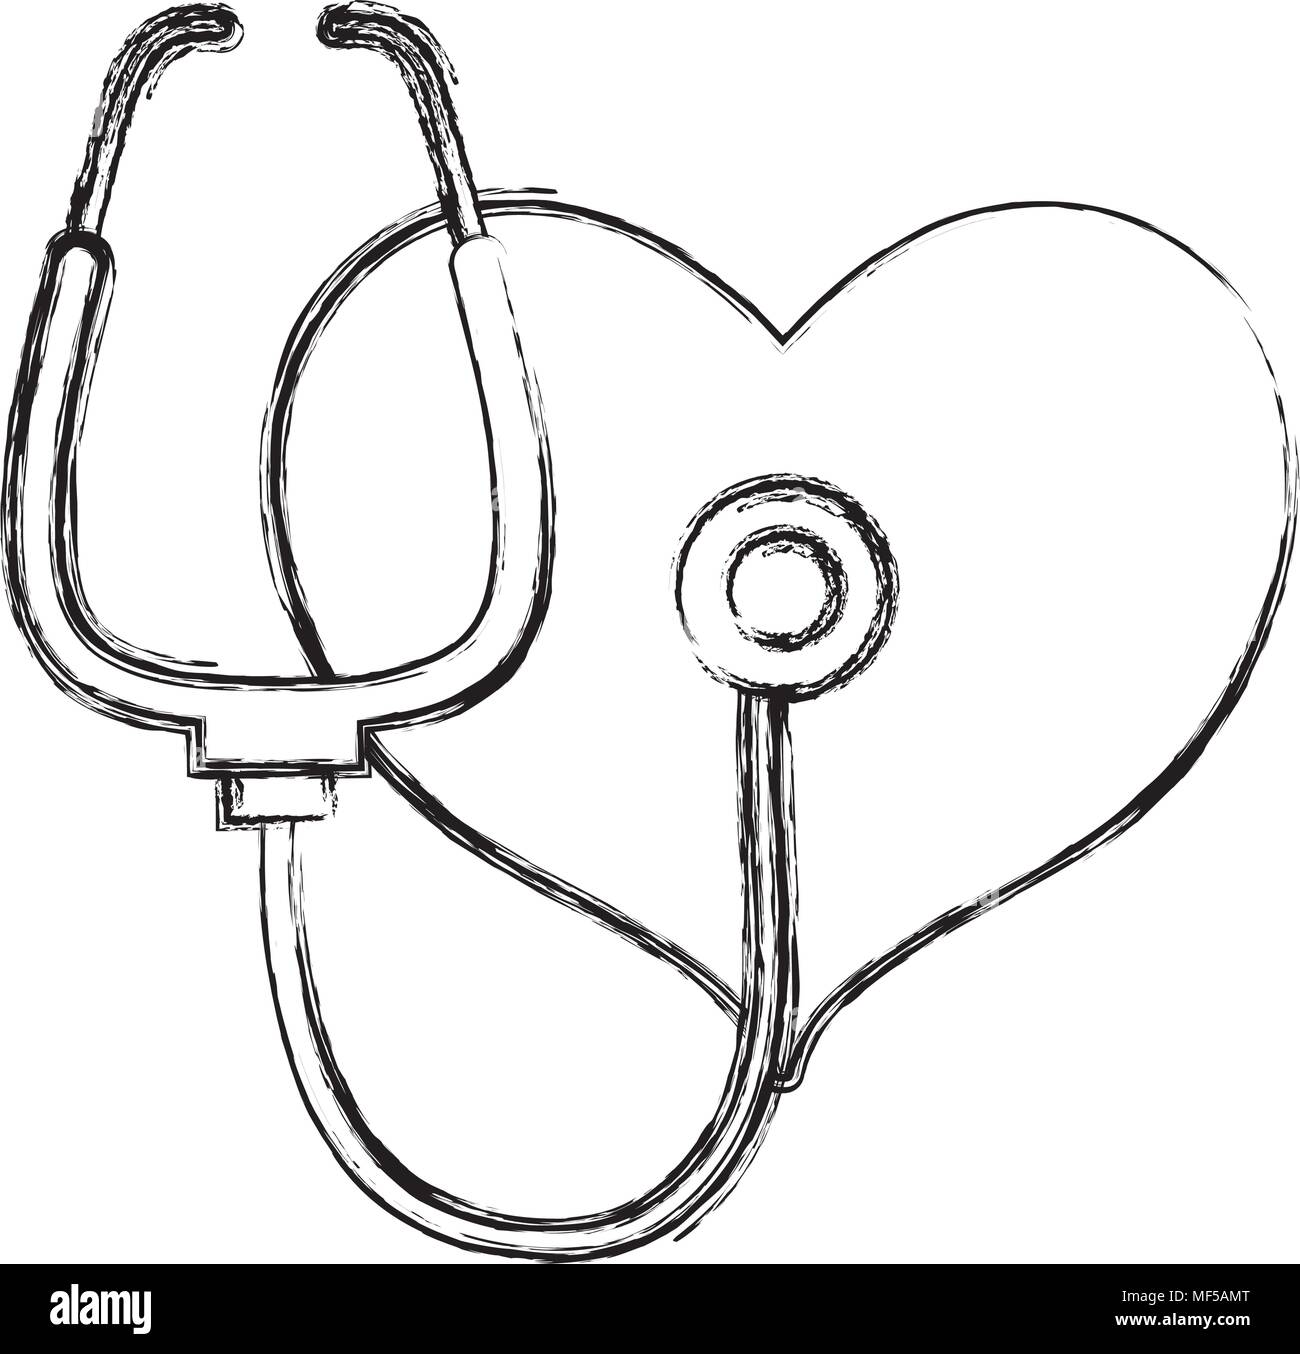 grunge heart with stethoscope tool to rhythm sign vector illustration Stock Vector